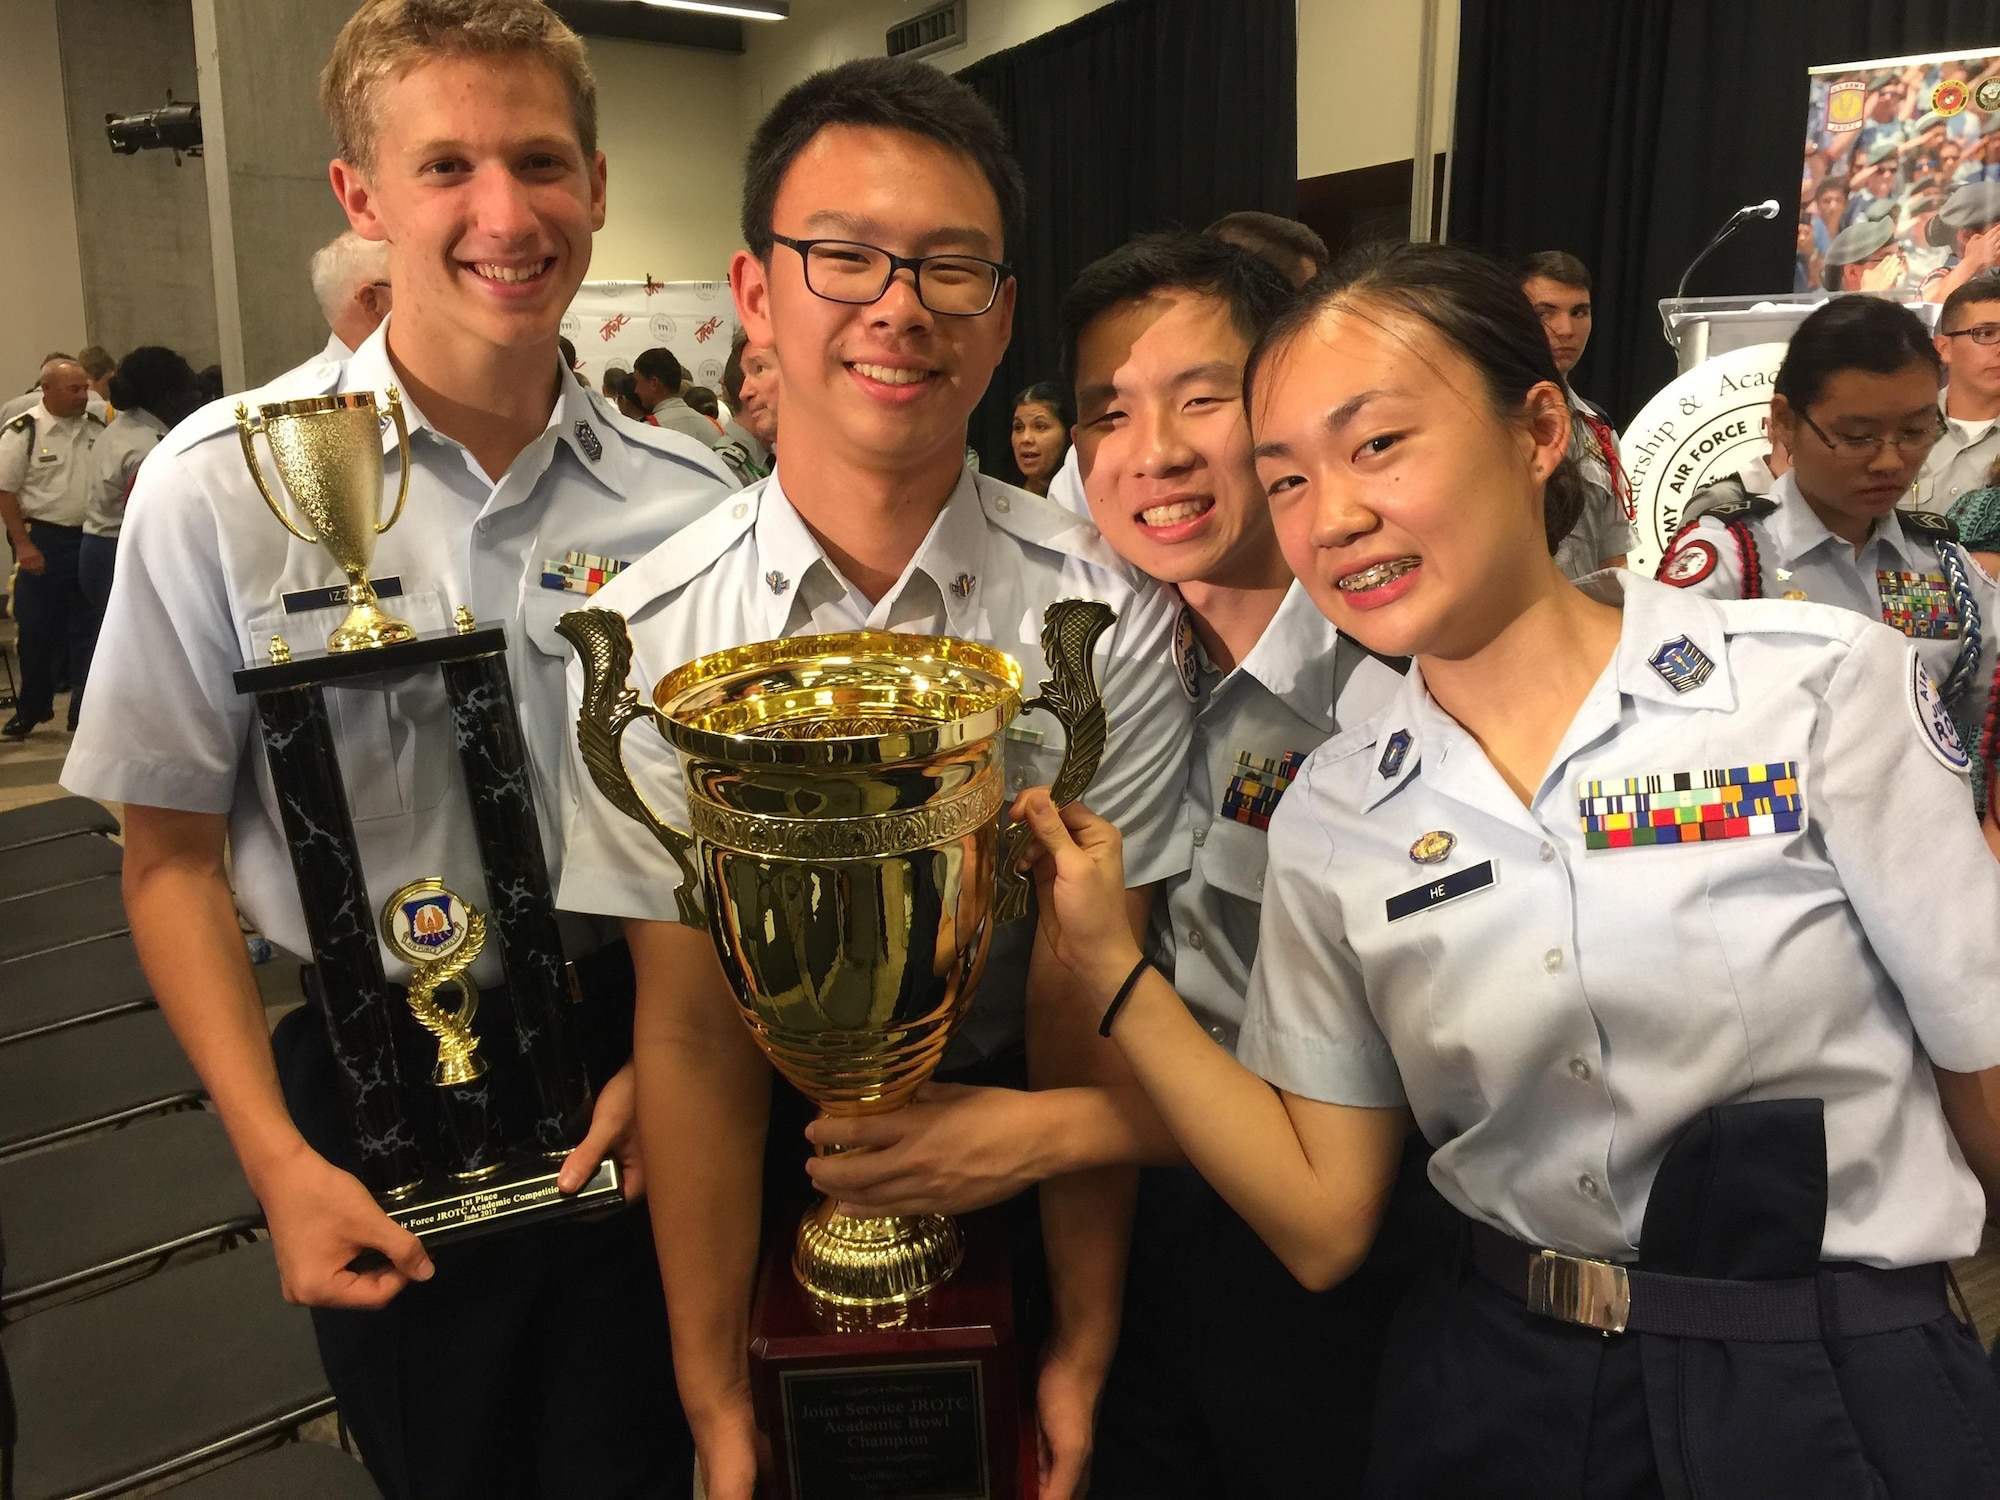 Air Force JROTC cadets from Scripps Ranch High School, San Diego, celebrate after winning the Joint Service Academic Bowl Championship at the 2017 JROTC Leadership and Academic Bowl Championship in Washington, D.C., in June. This is the second year in a row that cadets from Scripps Ranch have won the award. The contest is sponsored by College Options Foundation. (Courtesy photo)